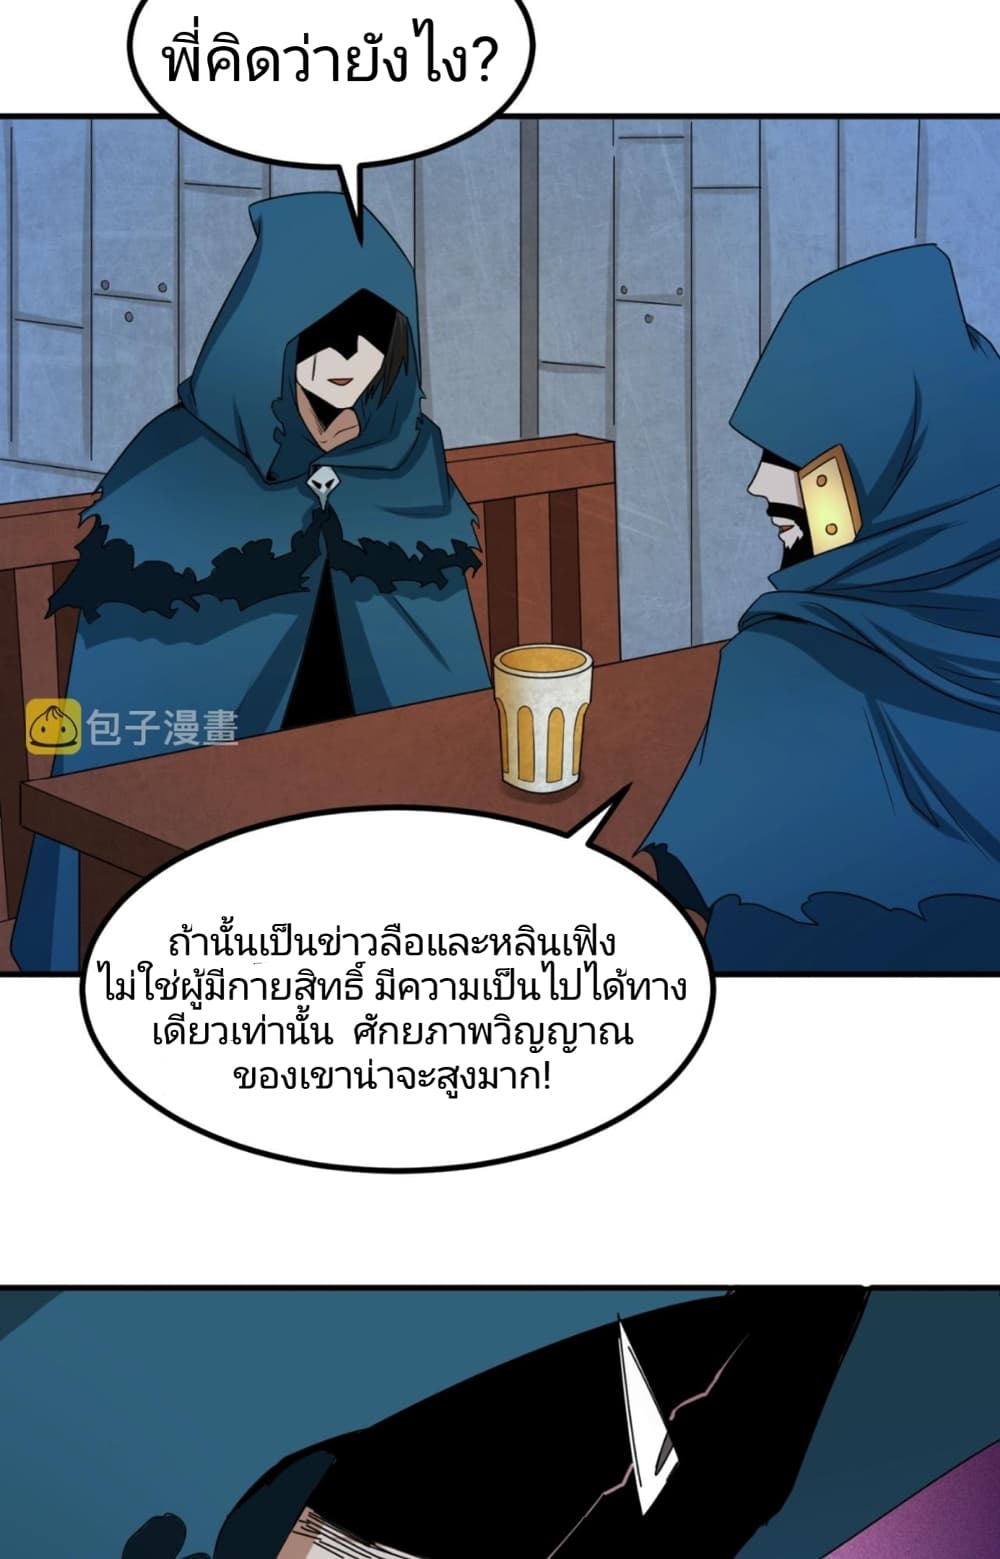 The Age of Ghost Spirits à¸à¸­à¸à¸à¸µà¹ 8 (52)